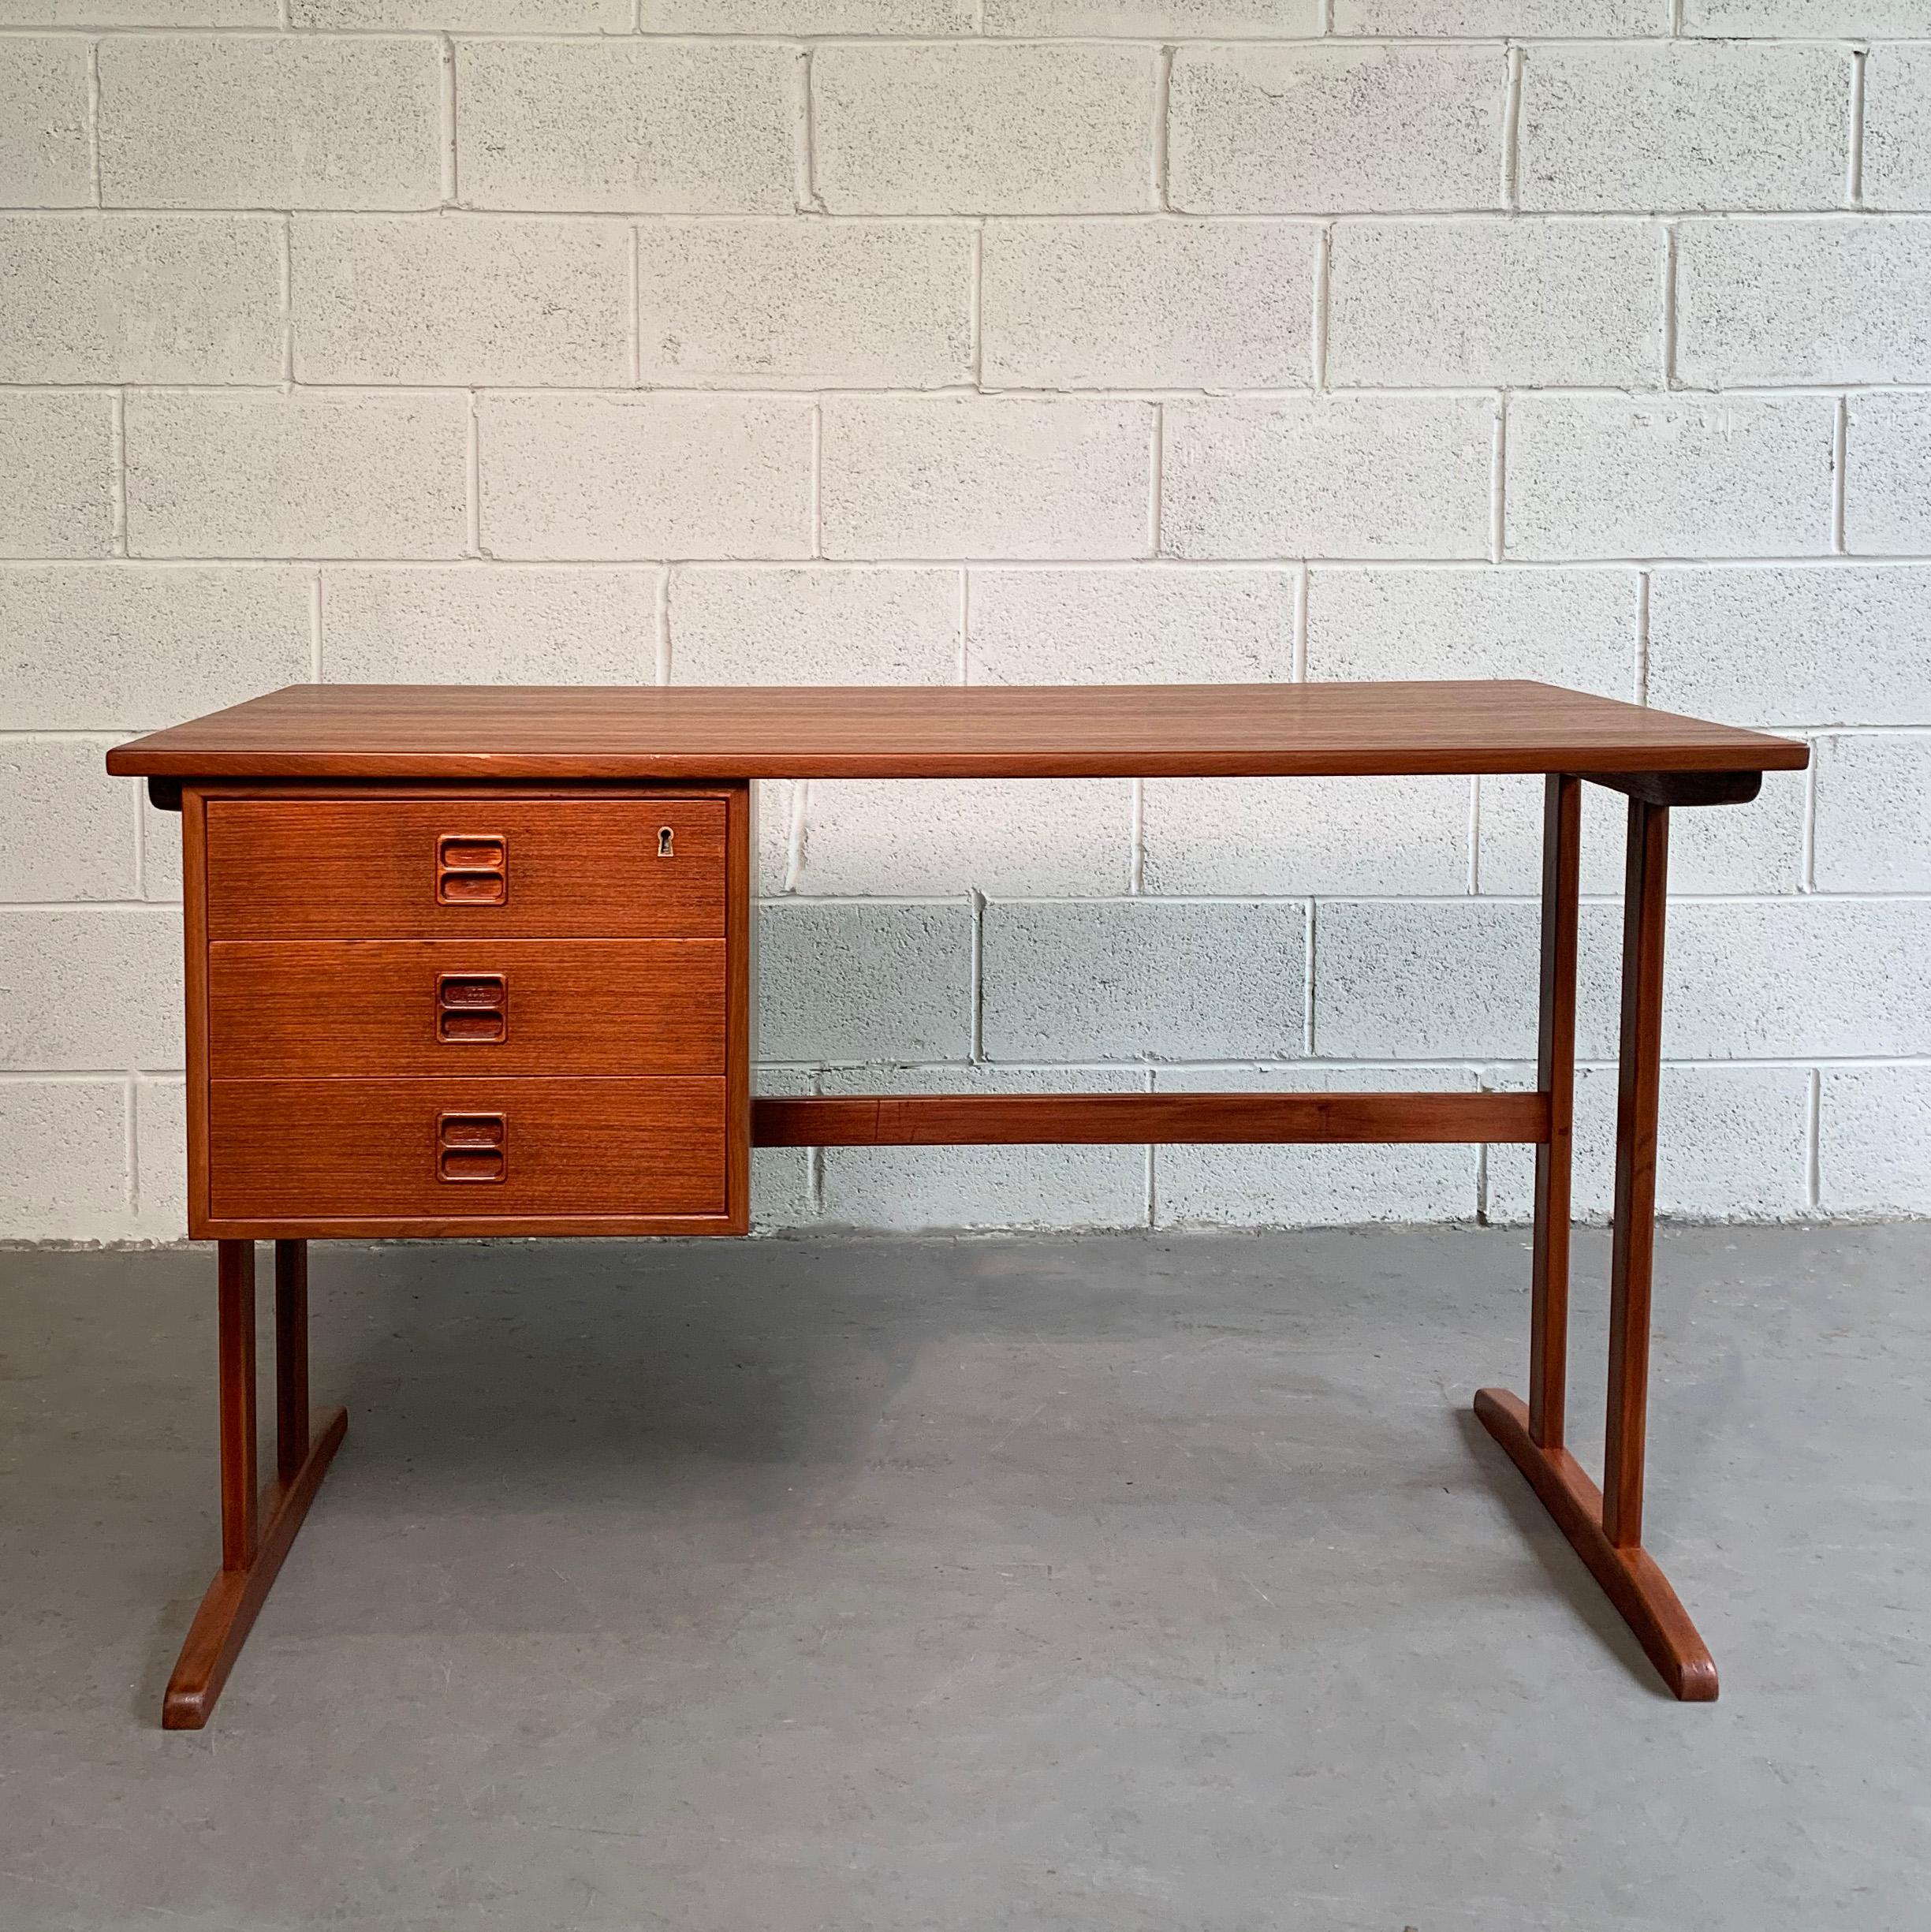 Danish modern, teak desk with 3 drawers features a trestle base with sled legs and is finished on the back with an open cubby book or display shelf.